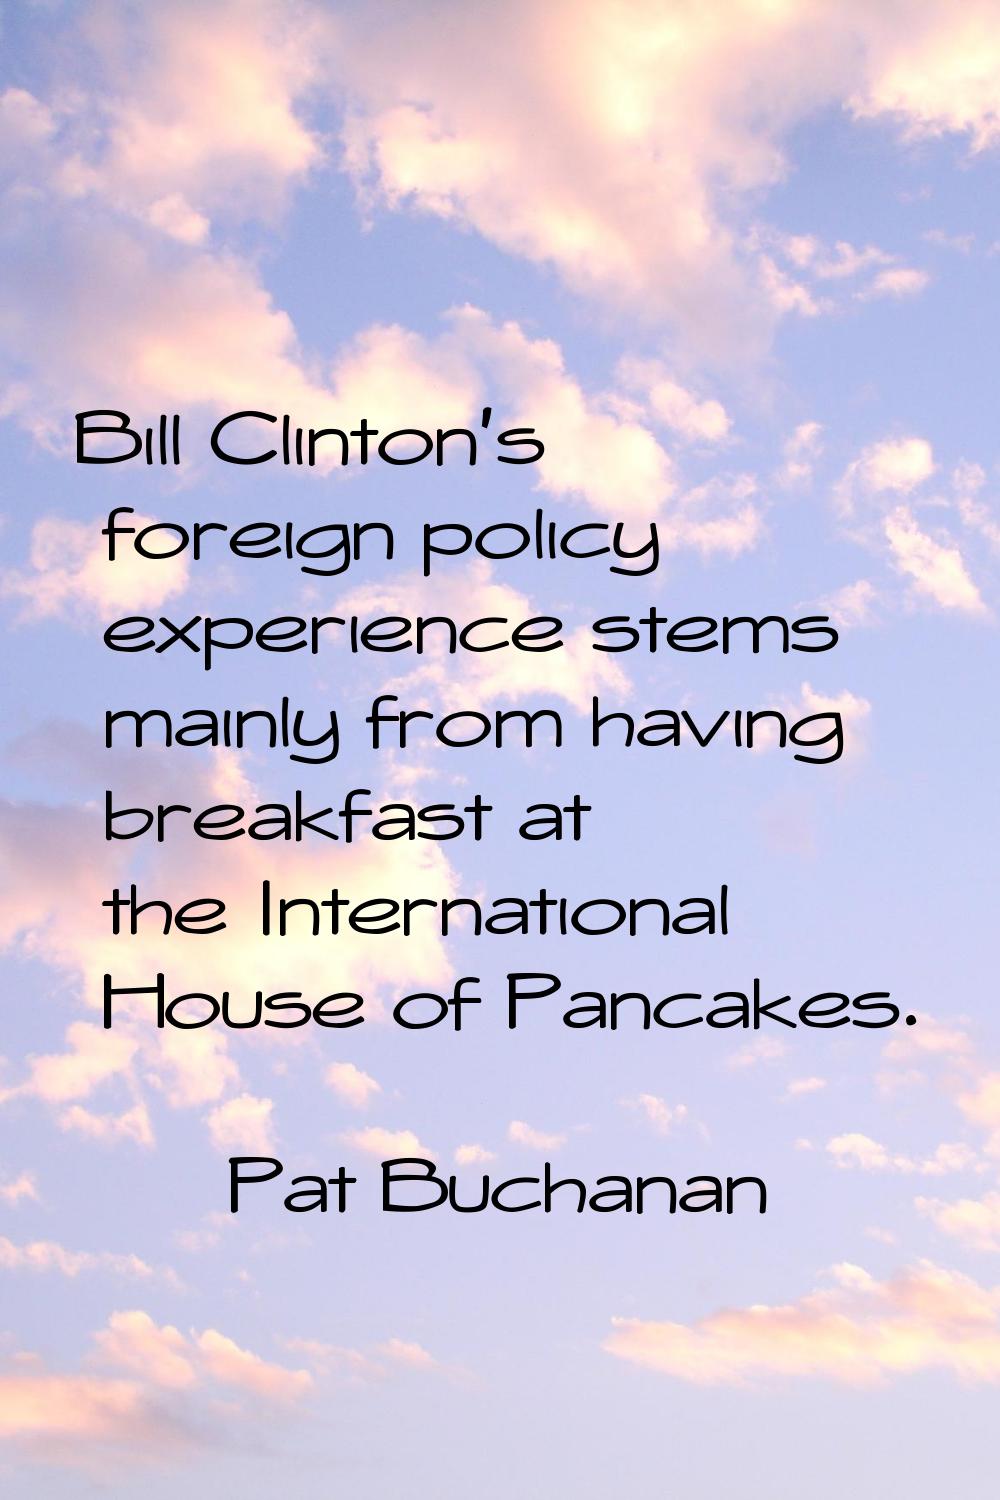 Bill Clinton's foreign policy experience stems mainly from having breakfast at the International Ho